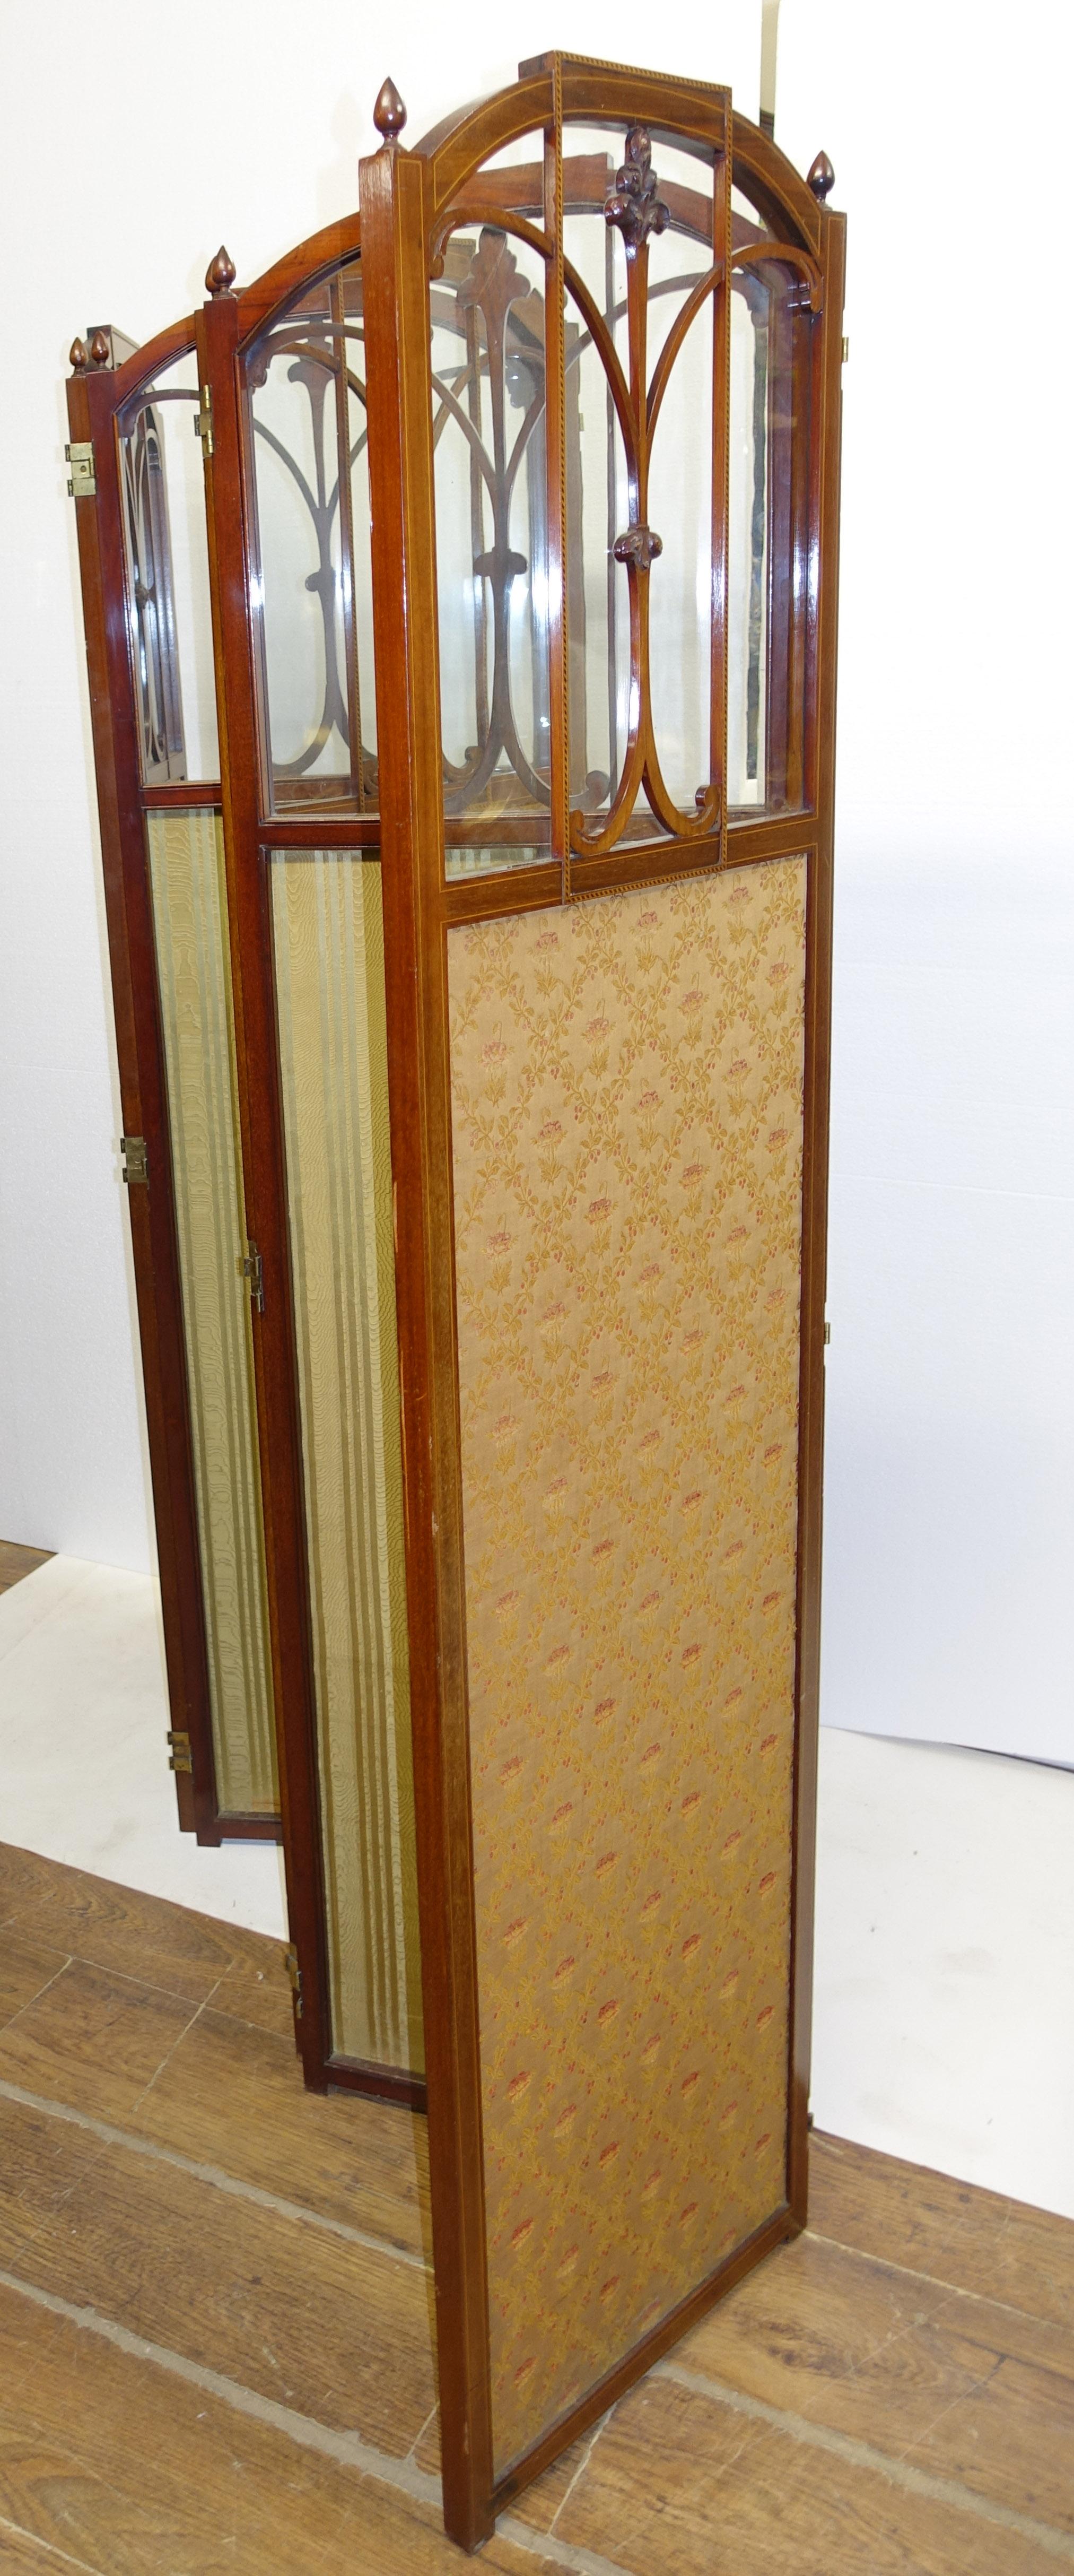 Edwardian Screen Room Divider Satinwood Fabric 1910 In Good Condition For Sale In Potters Bar, GB